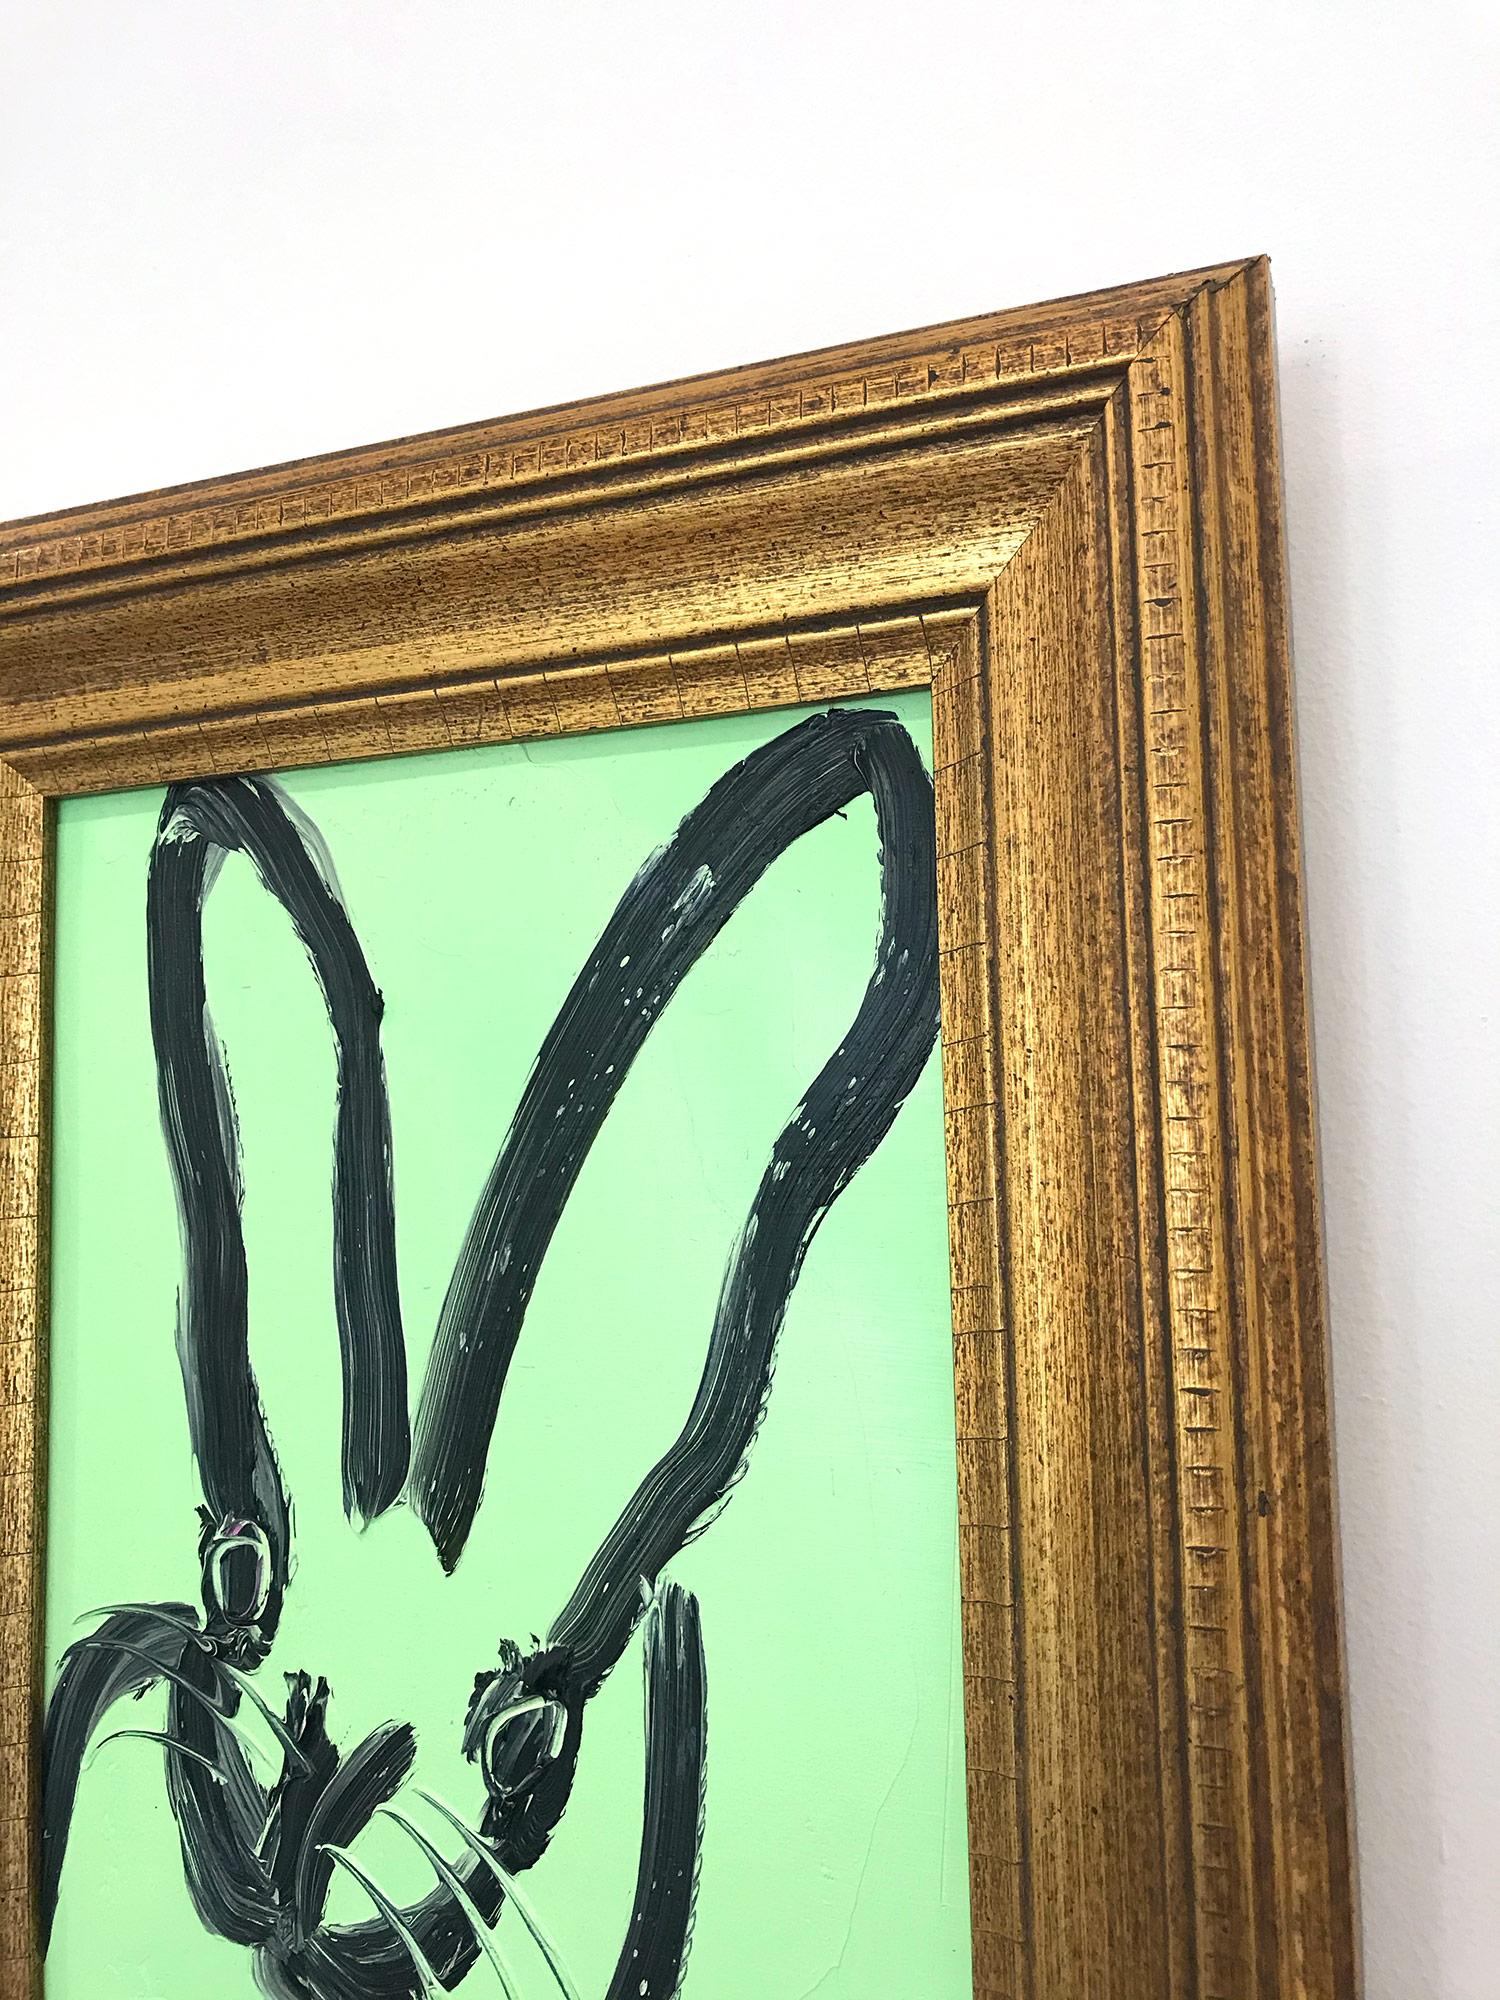 A wonderful composition of one of Slonem's most iconic subjects, Bunnies. This piece depicts a gestural figure of a black bunny on a green background with thick use of paint. Inspired by nature and a genuine love for animals, Slonem's paintings